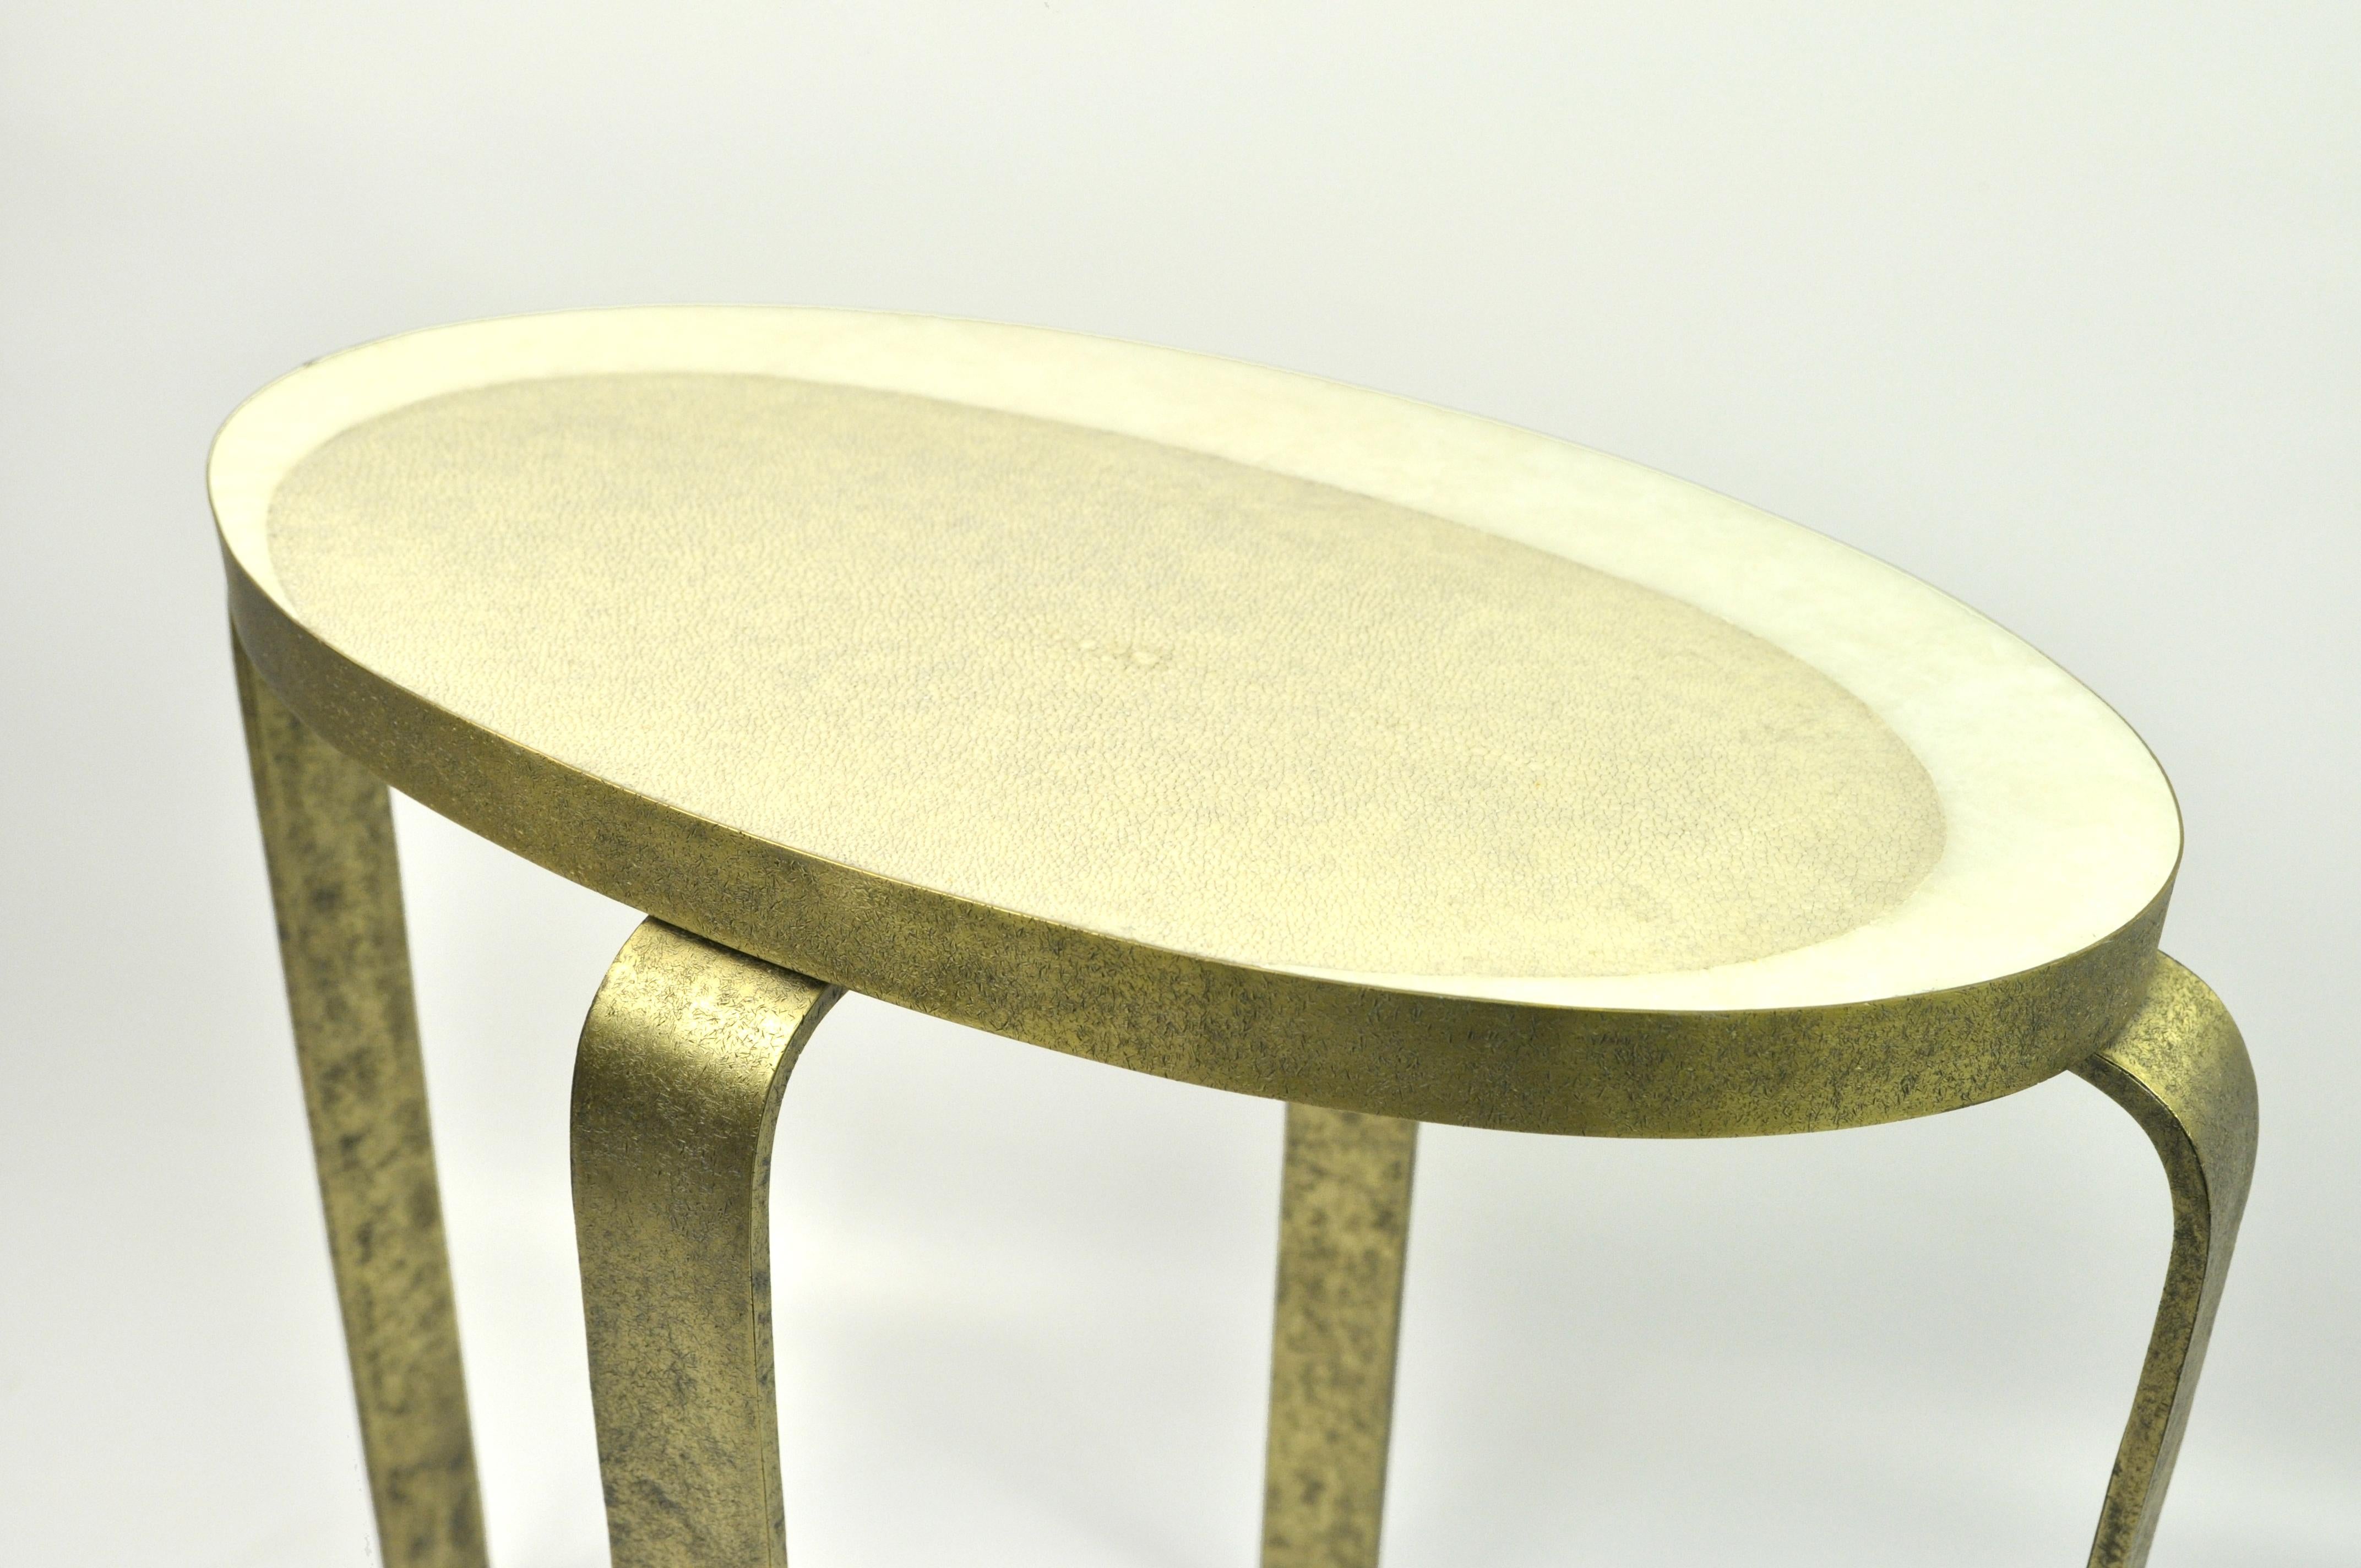 The Eliptus side table is made of textured brass with an oval shape genuine shagreen and rock crystal marquetry top.
The brass has been hammered by hand to give an irregular and artistic finish aspect.
The natural color of the shagreen contrasts